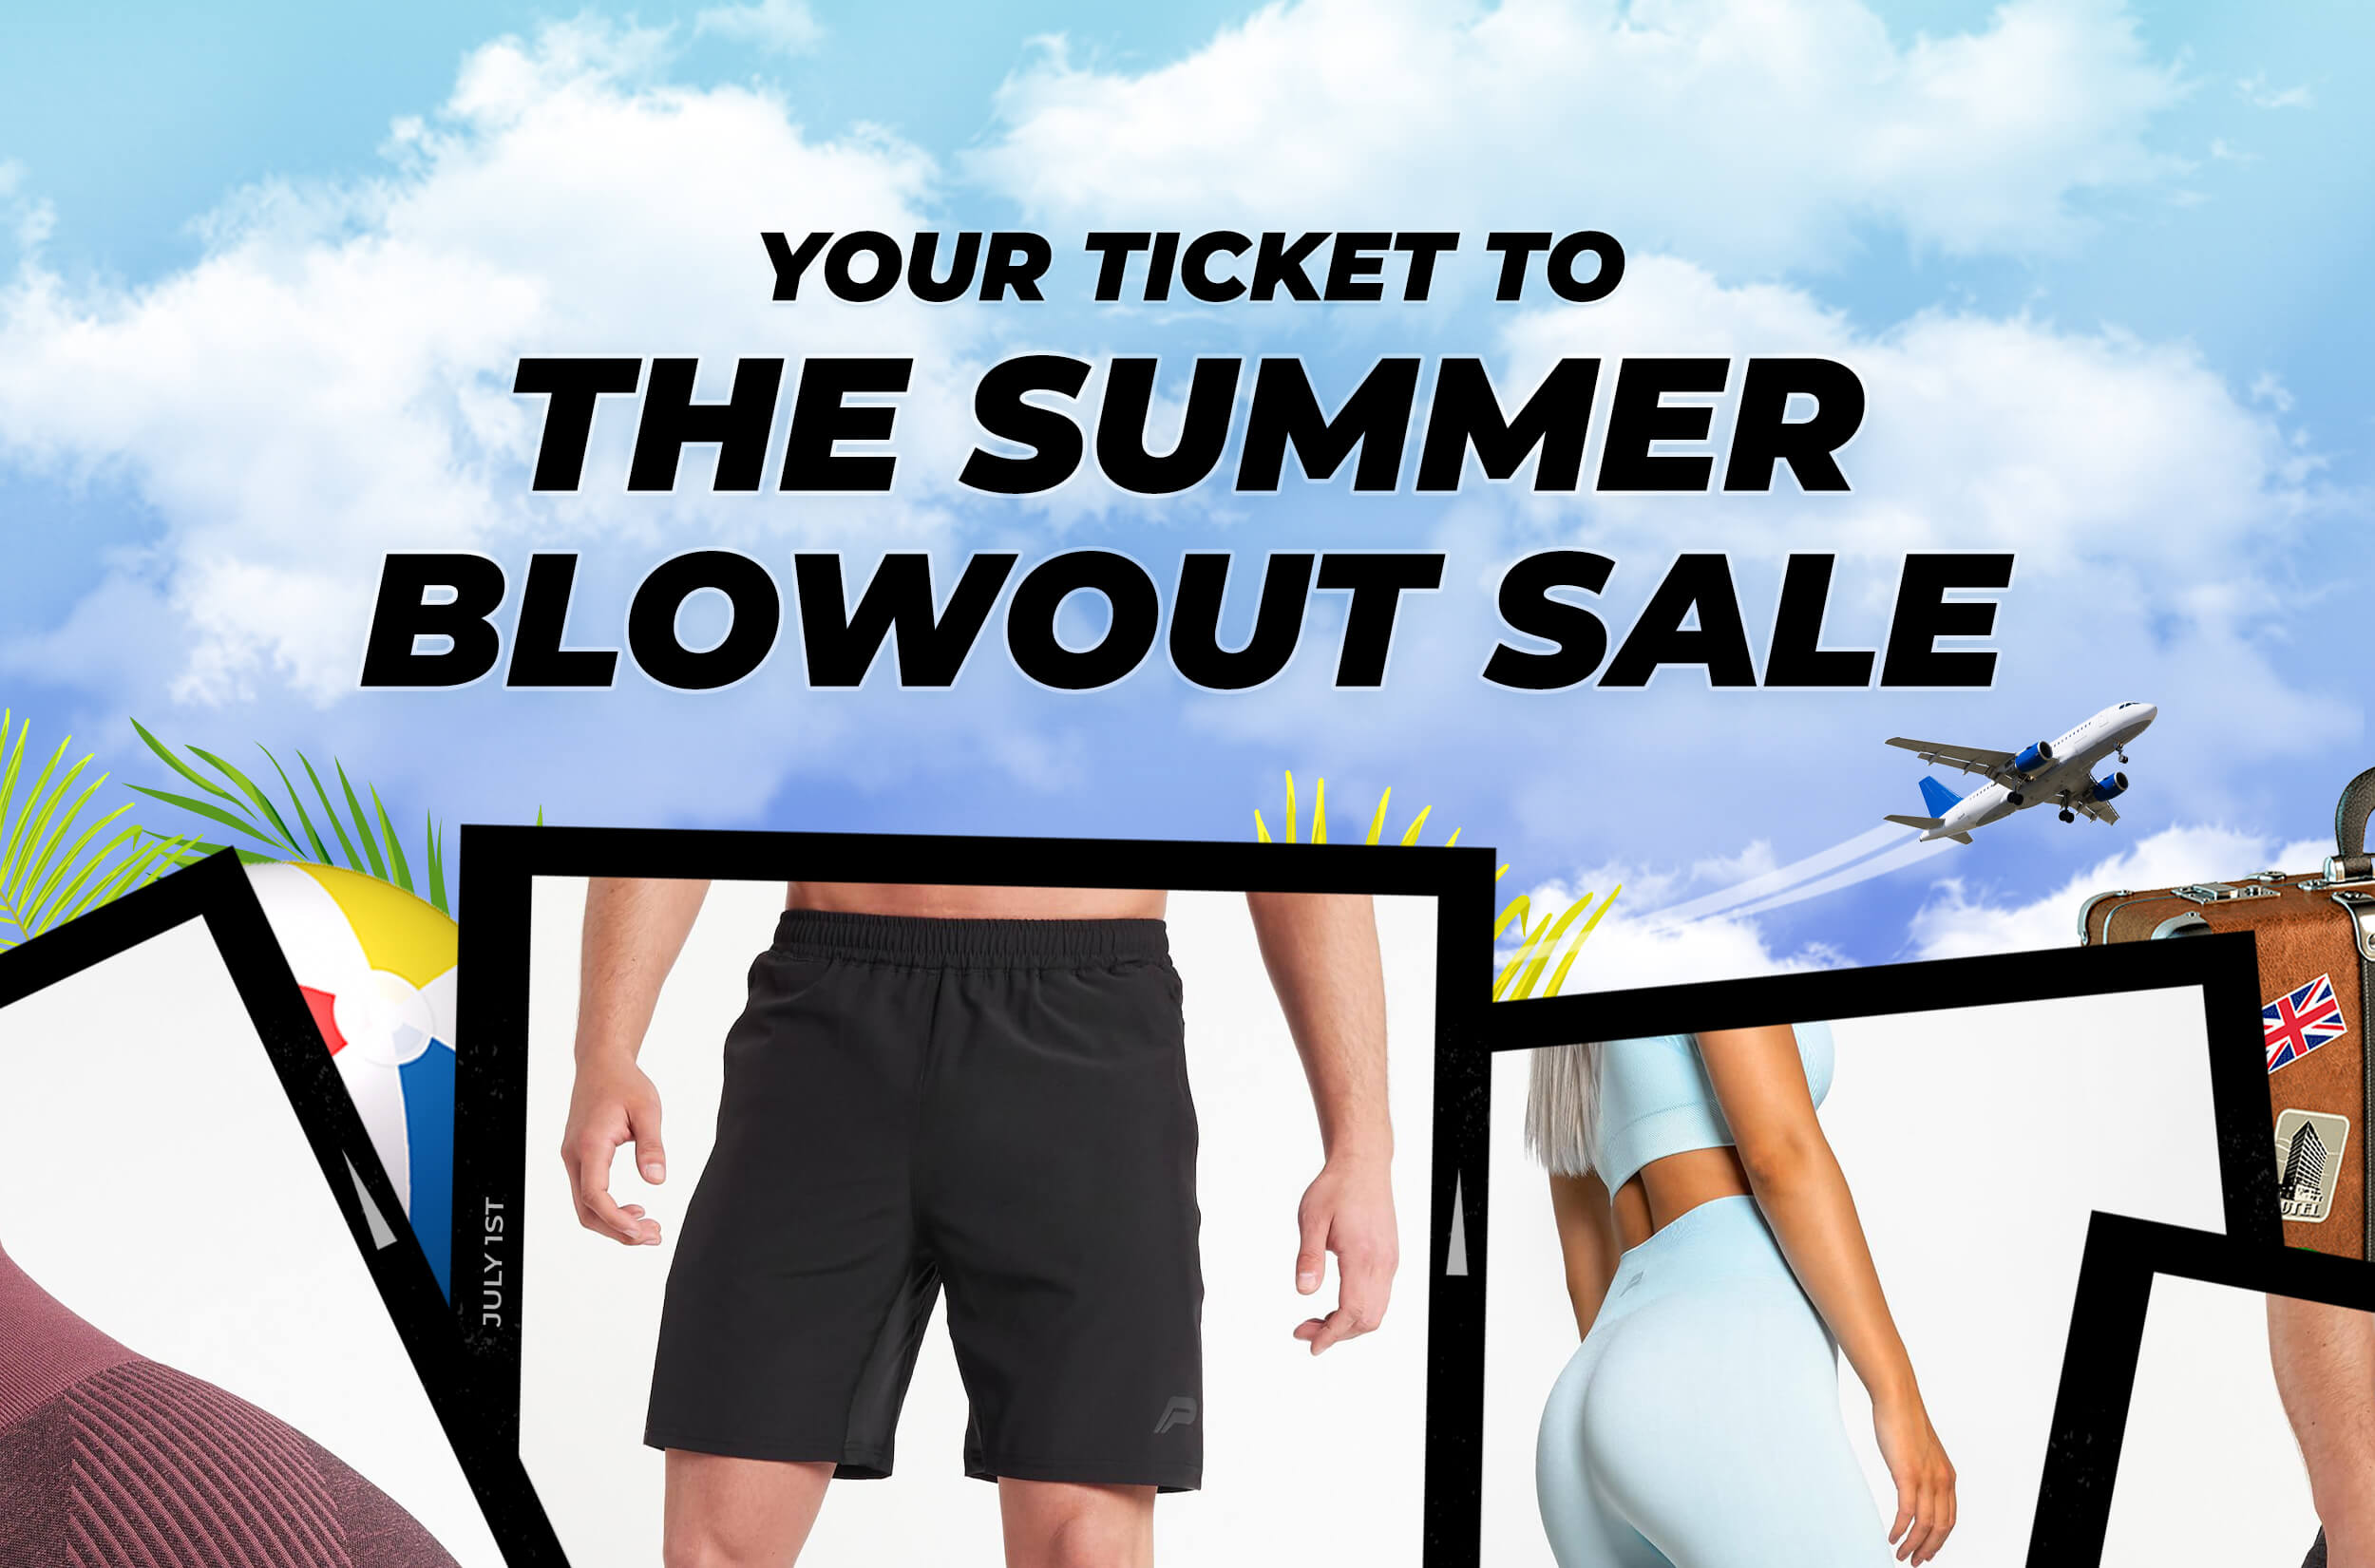 The Summer Blowout Sale